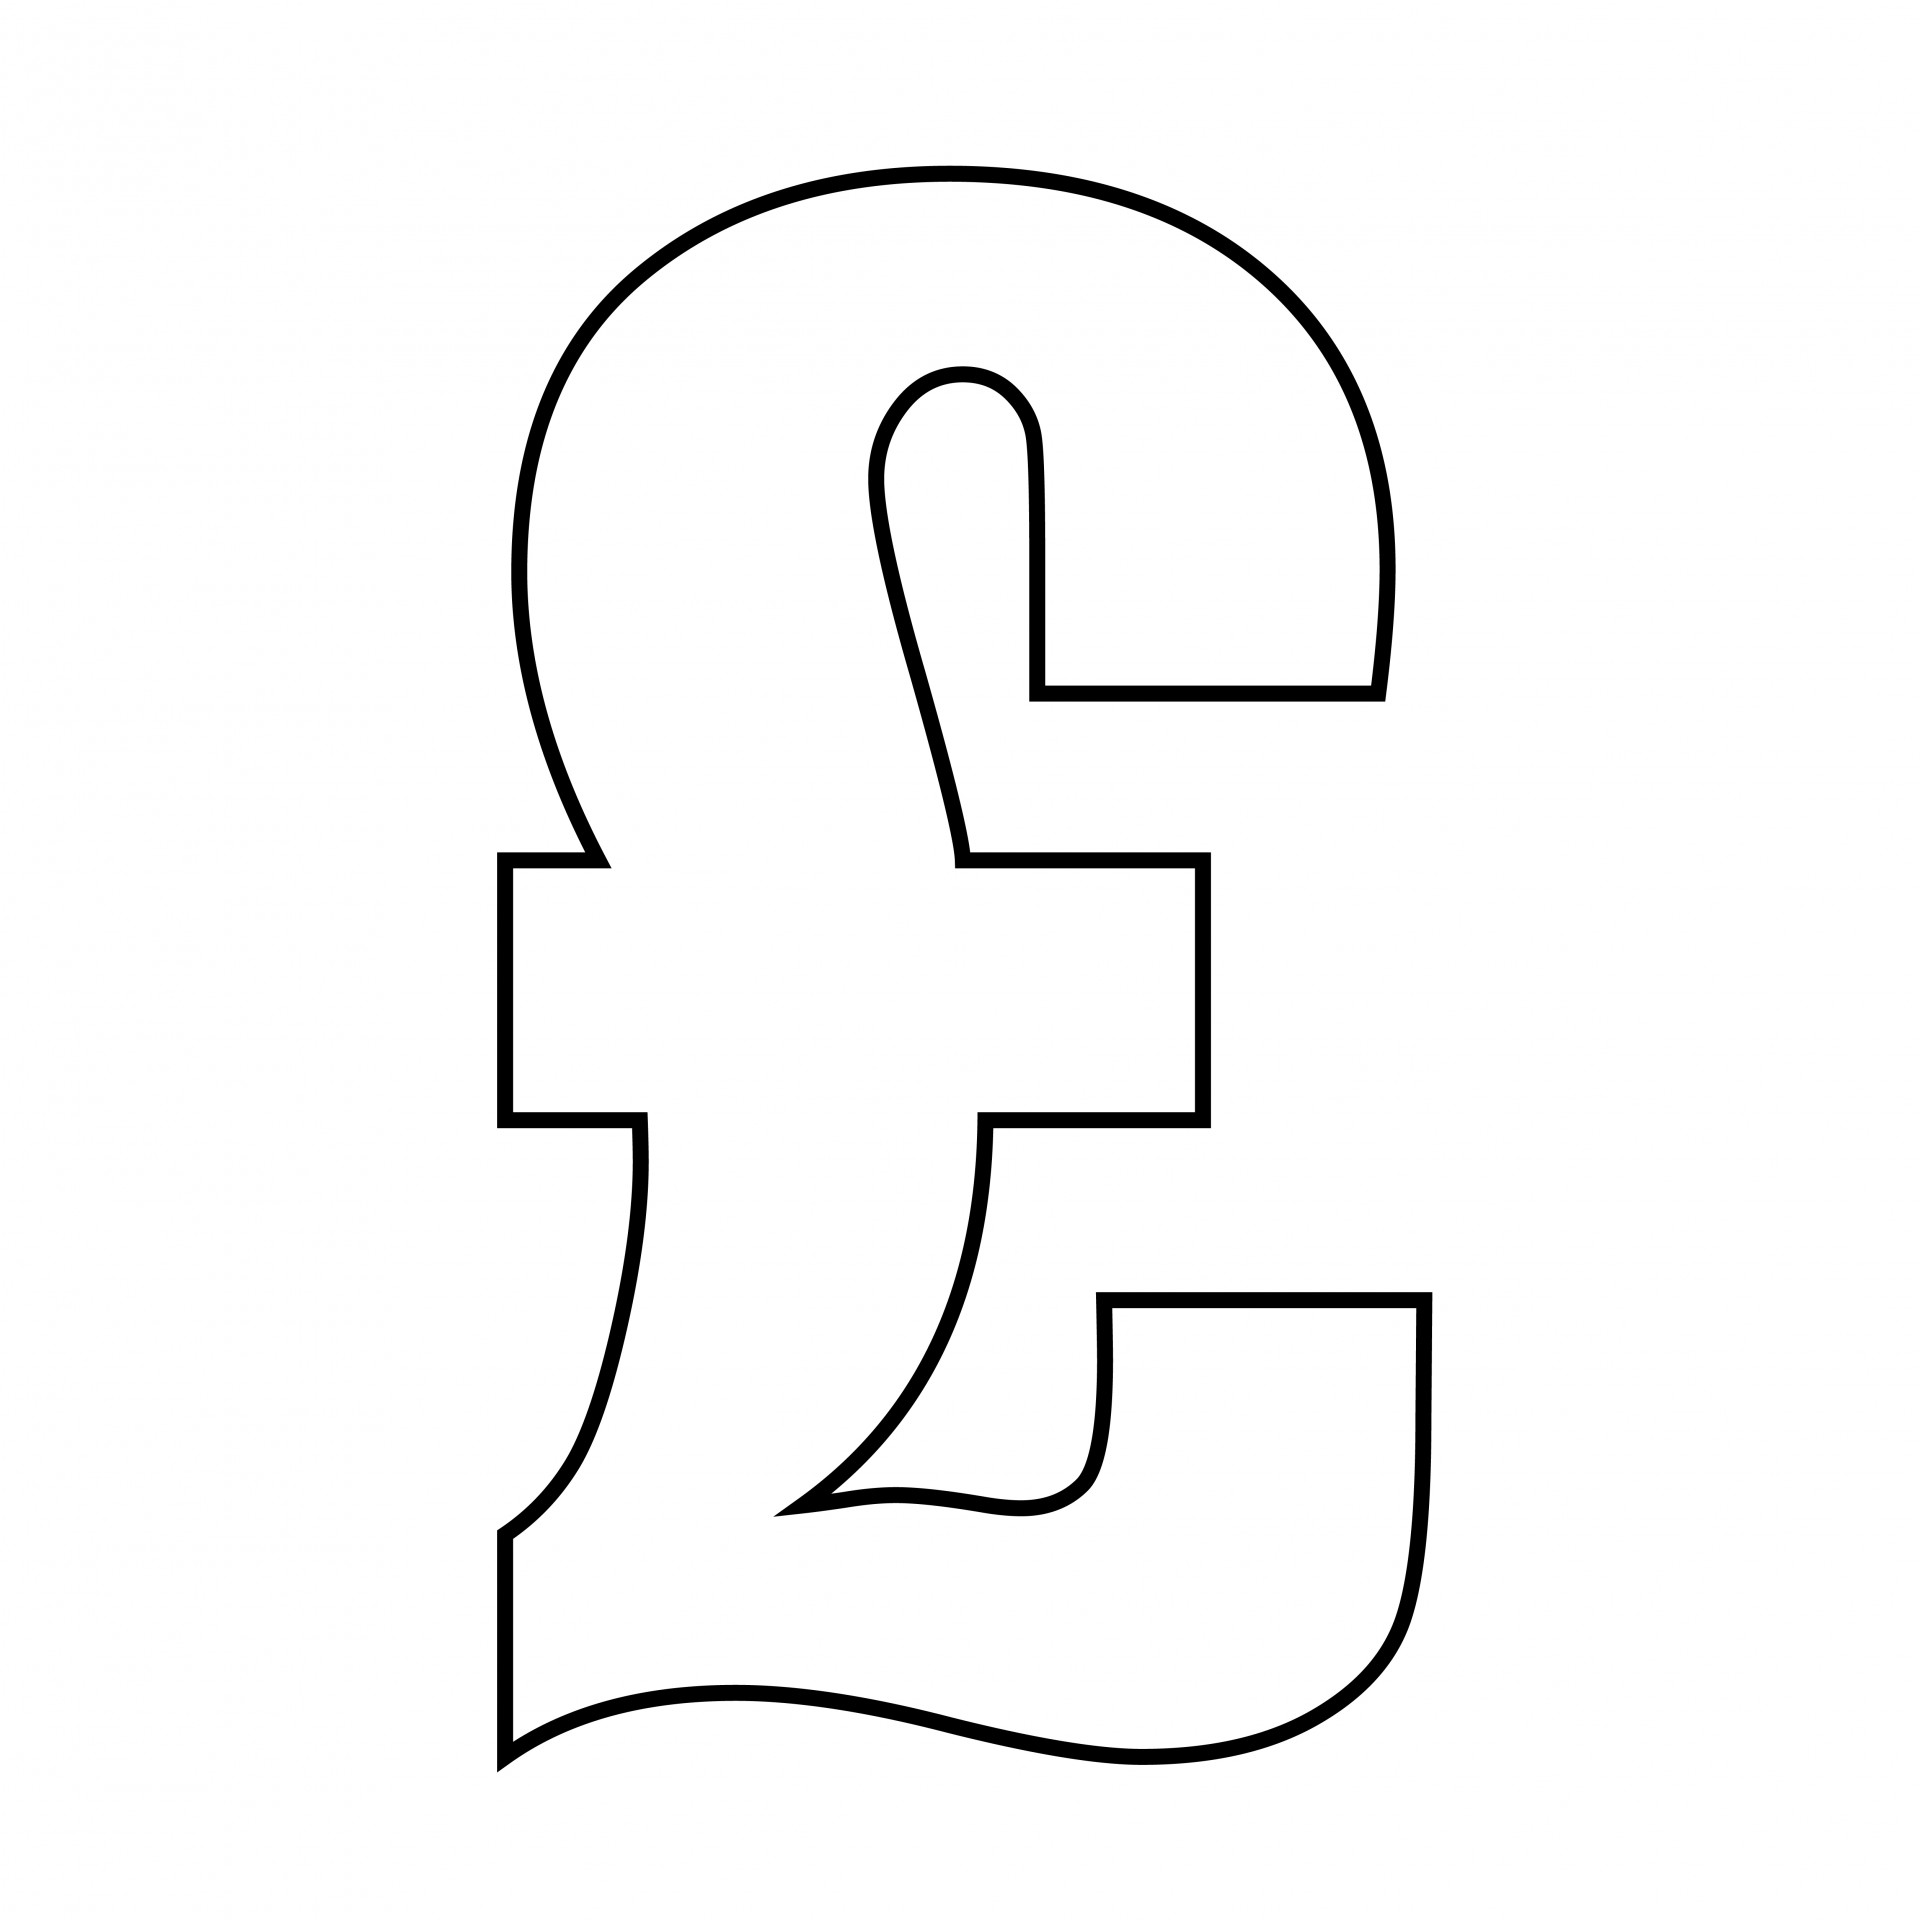 Outline of pound sign clipart